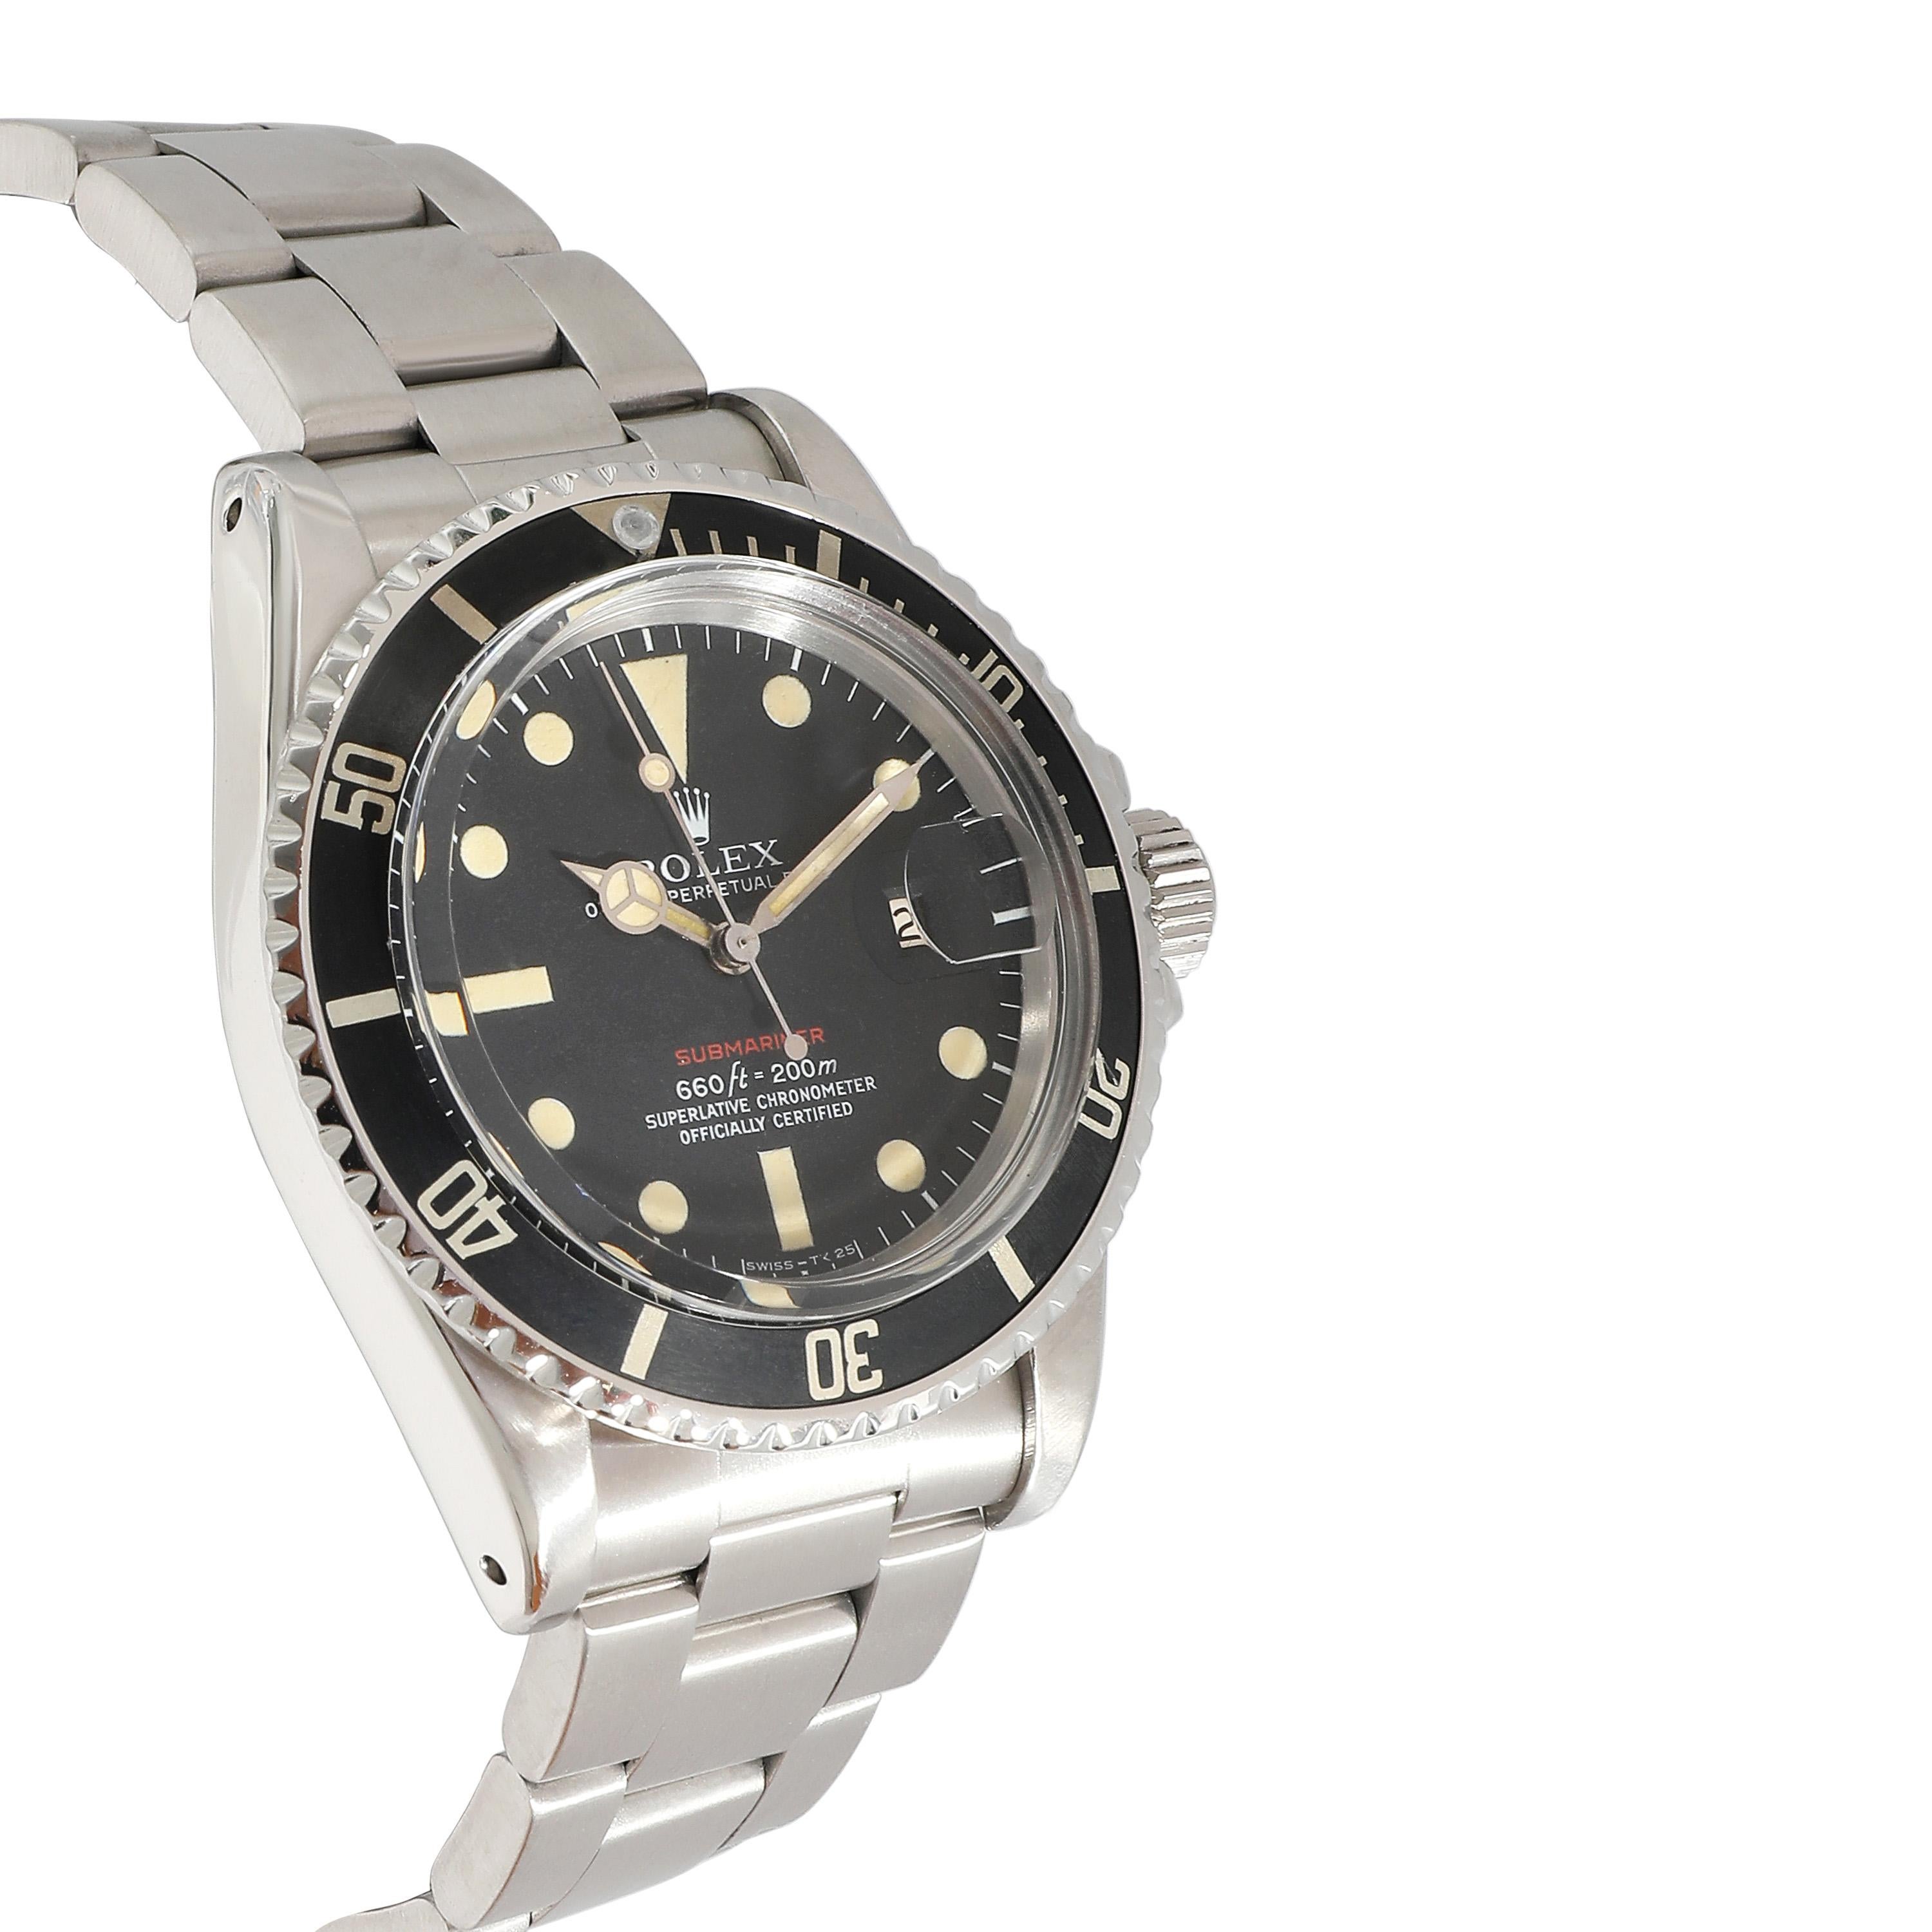 Rolex Submariner 1680 Men's Watch in  Stainless Steel In Excellent Condition For Sale In New York, NY